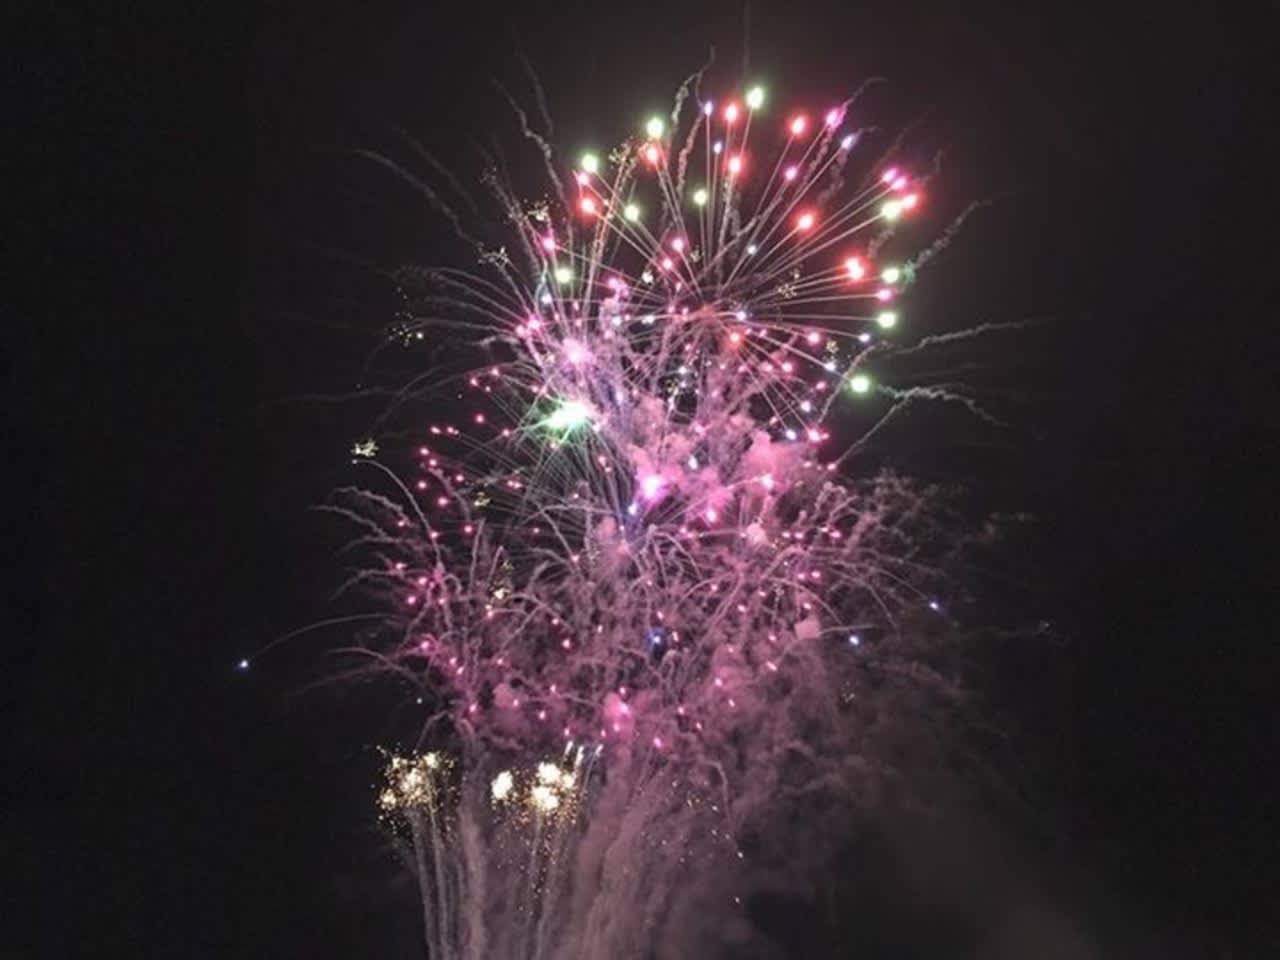 Saddle Brook is holding its annual fireworks display July 3.